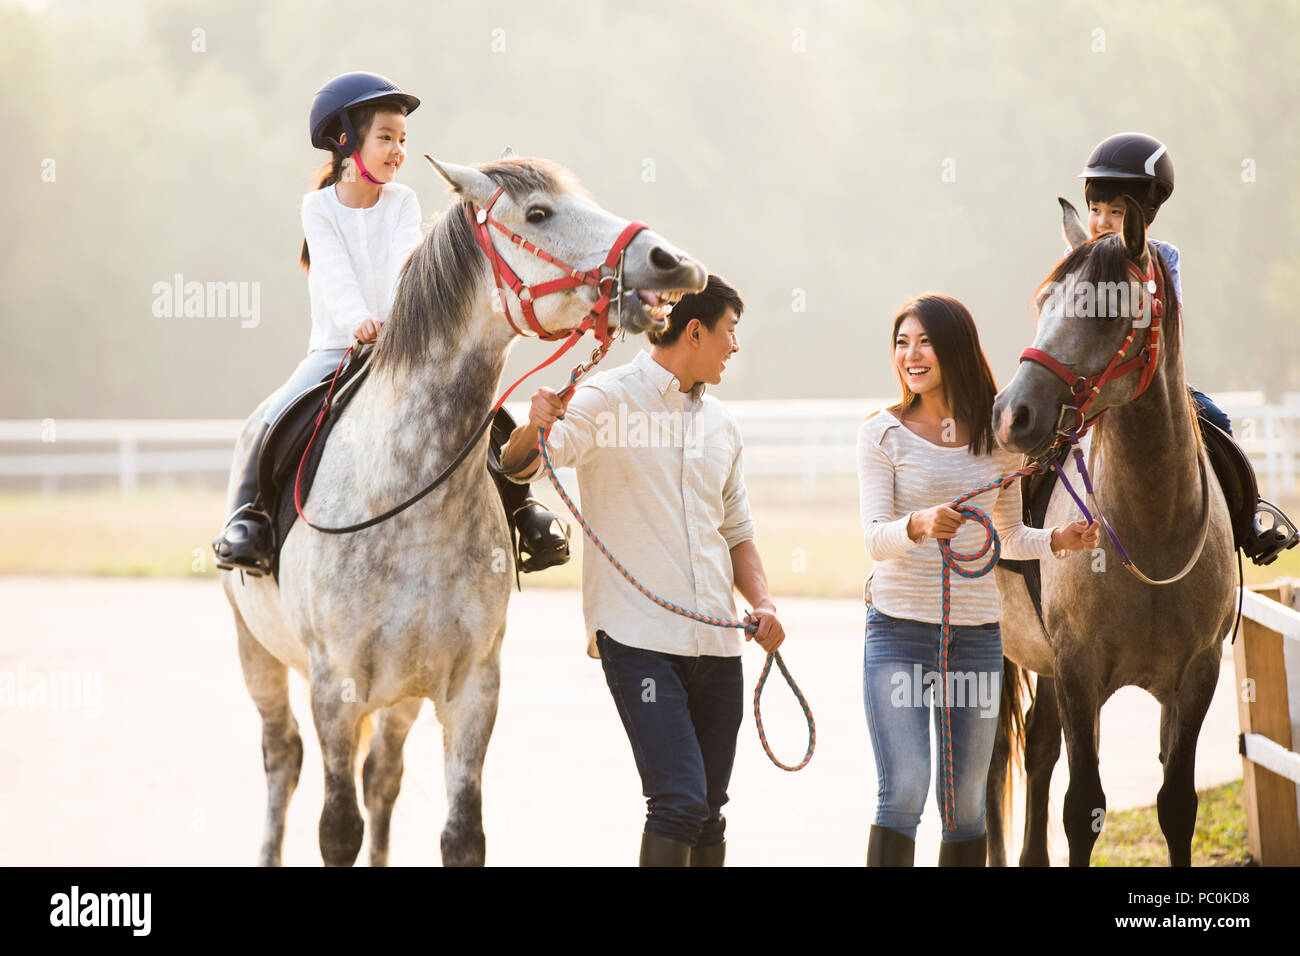 Cheerful young Chinese family riding horses Banque D'Images